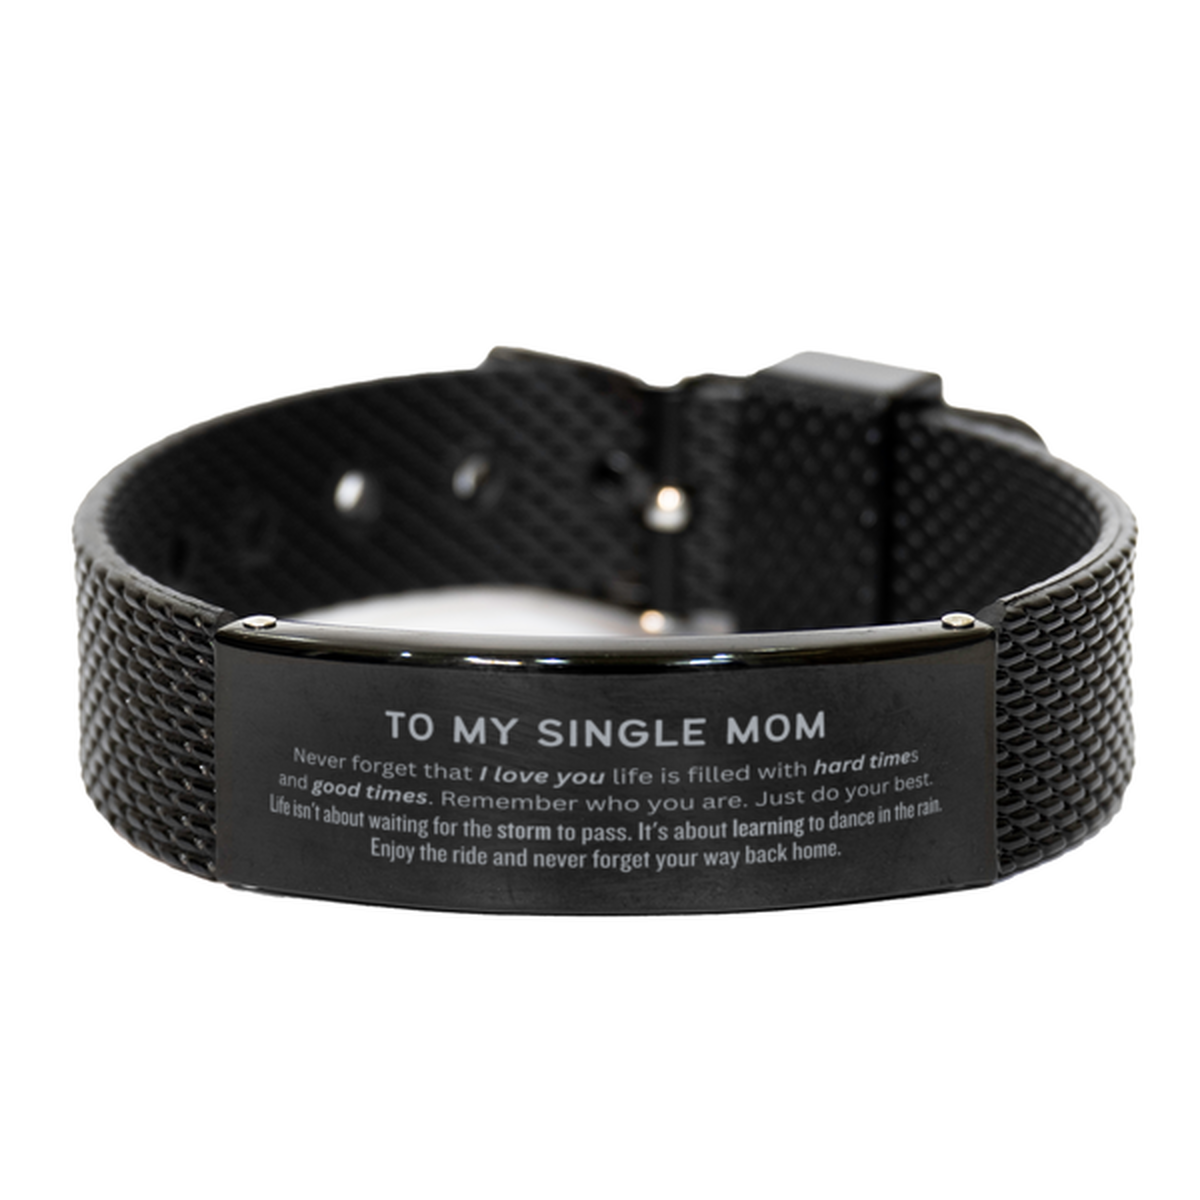 Christmas Single Mom Black Shark Mesh Bracelet Gifts, To My Single Mom Birthday Thank You Gifts For Single Mom, Graduation Unique Gifts For Single Mom To My Single Mom Never forget that I love you life is filled with hard times and good times. Remember wh